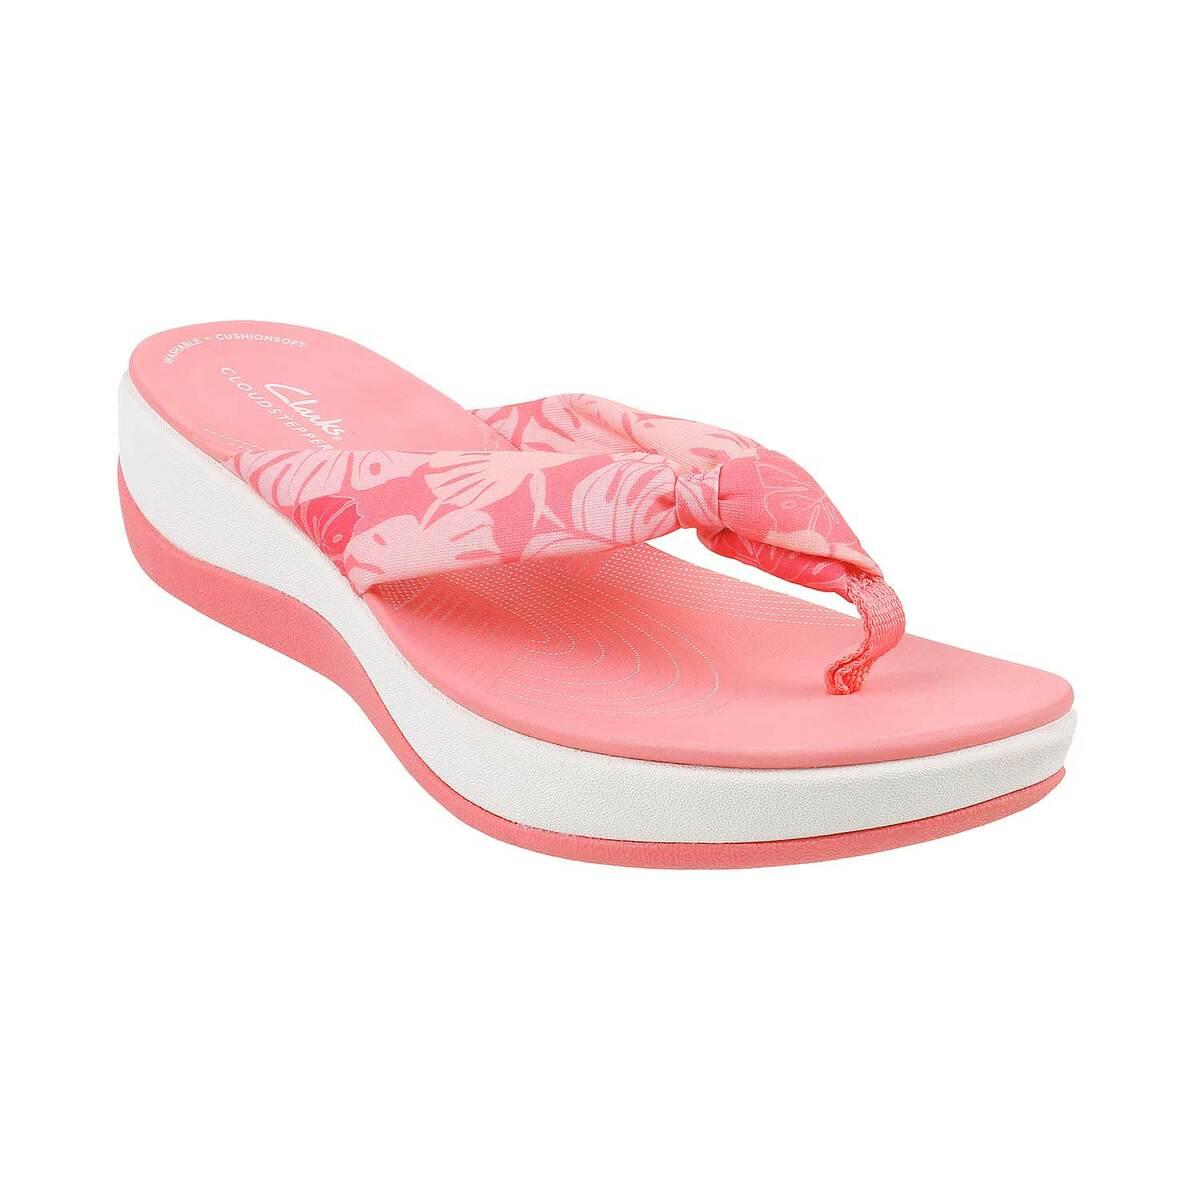 Sandals - Comfortable Flat & Strappy Sandals | Clarks US